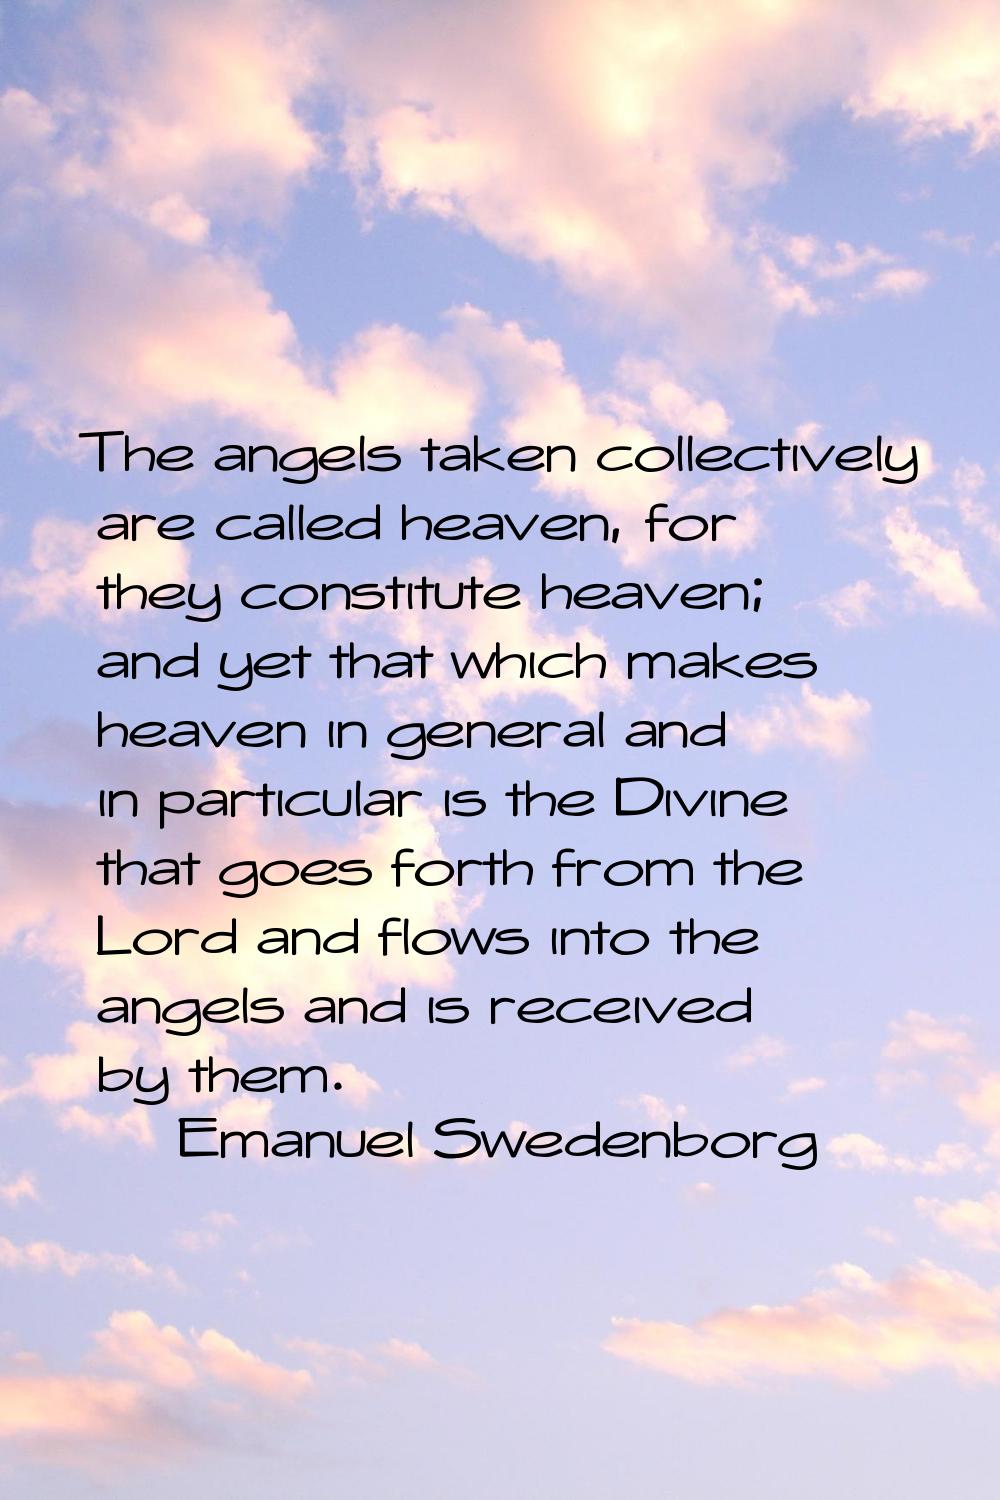 The angels taken collectively are called heaven, for they constitute heaven; and yet that which mak